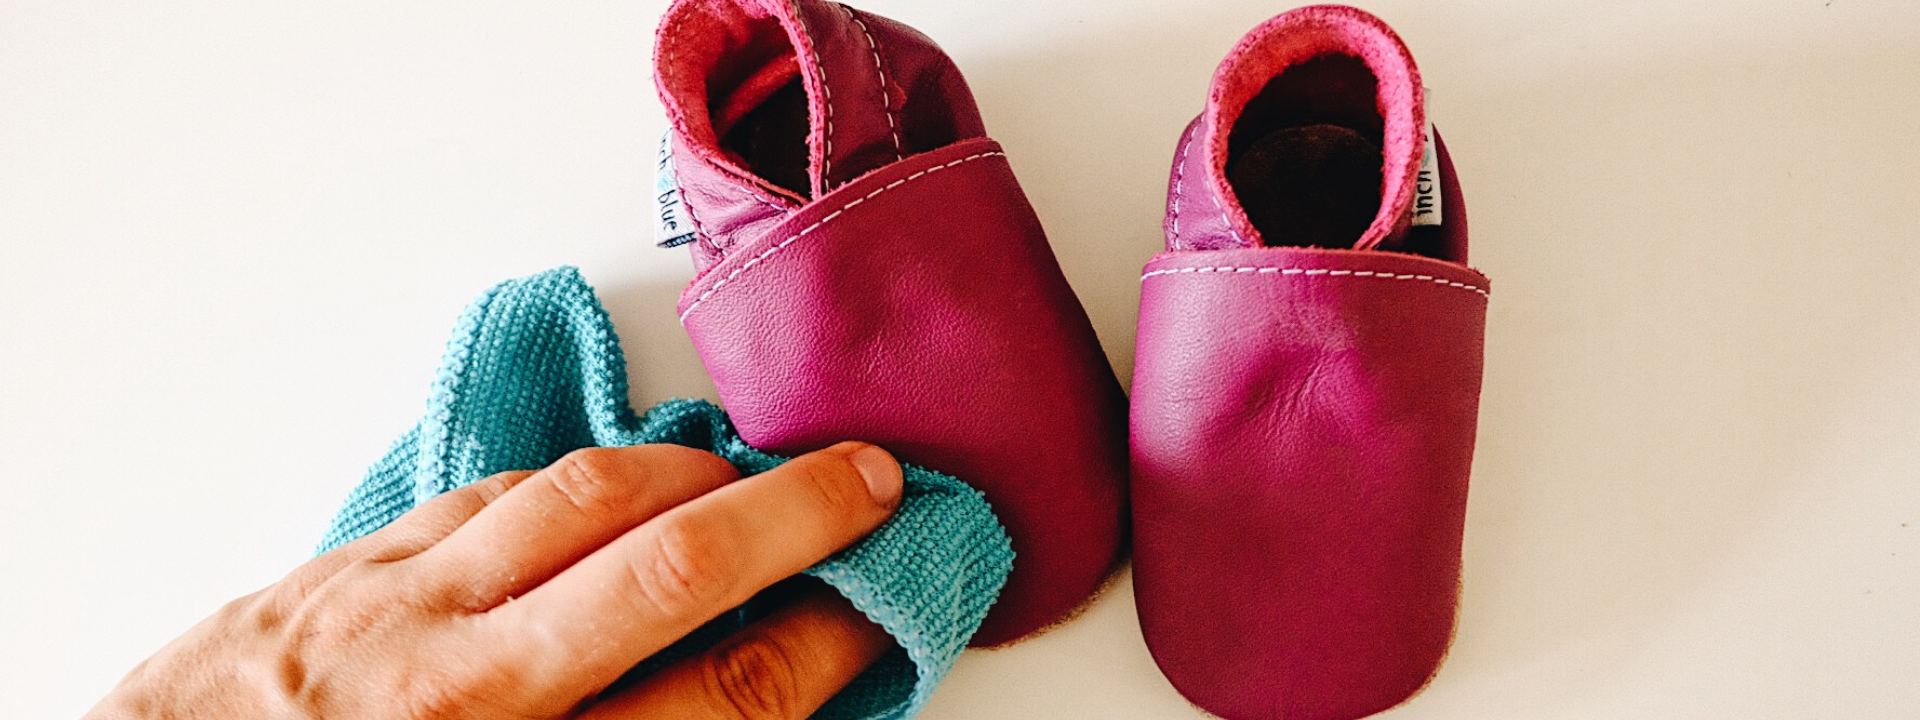 HOW TO CLEAN YOUR BABY SHOES